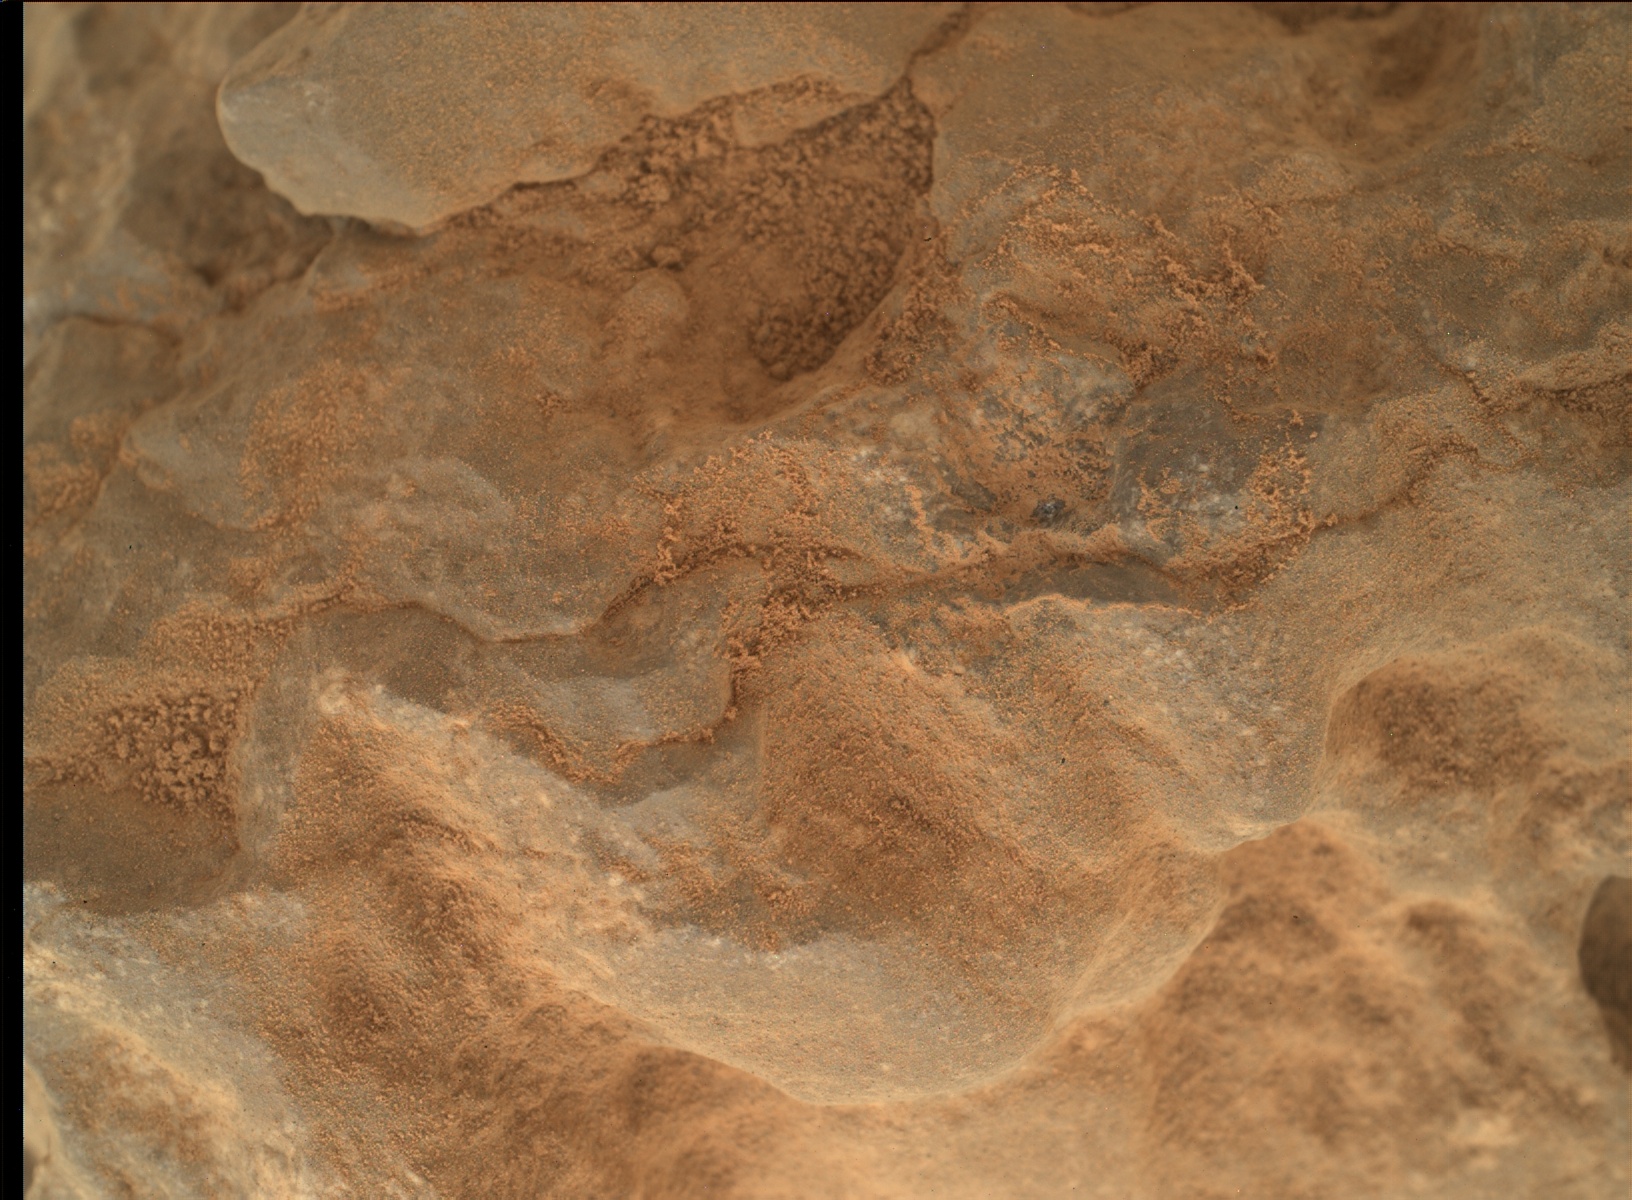 Nasa's Mars rover Curiosity acquired this image using its Mars Hand Lens Imager (MAHLI) on Sol 687